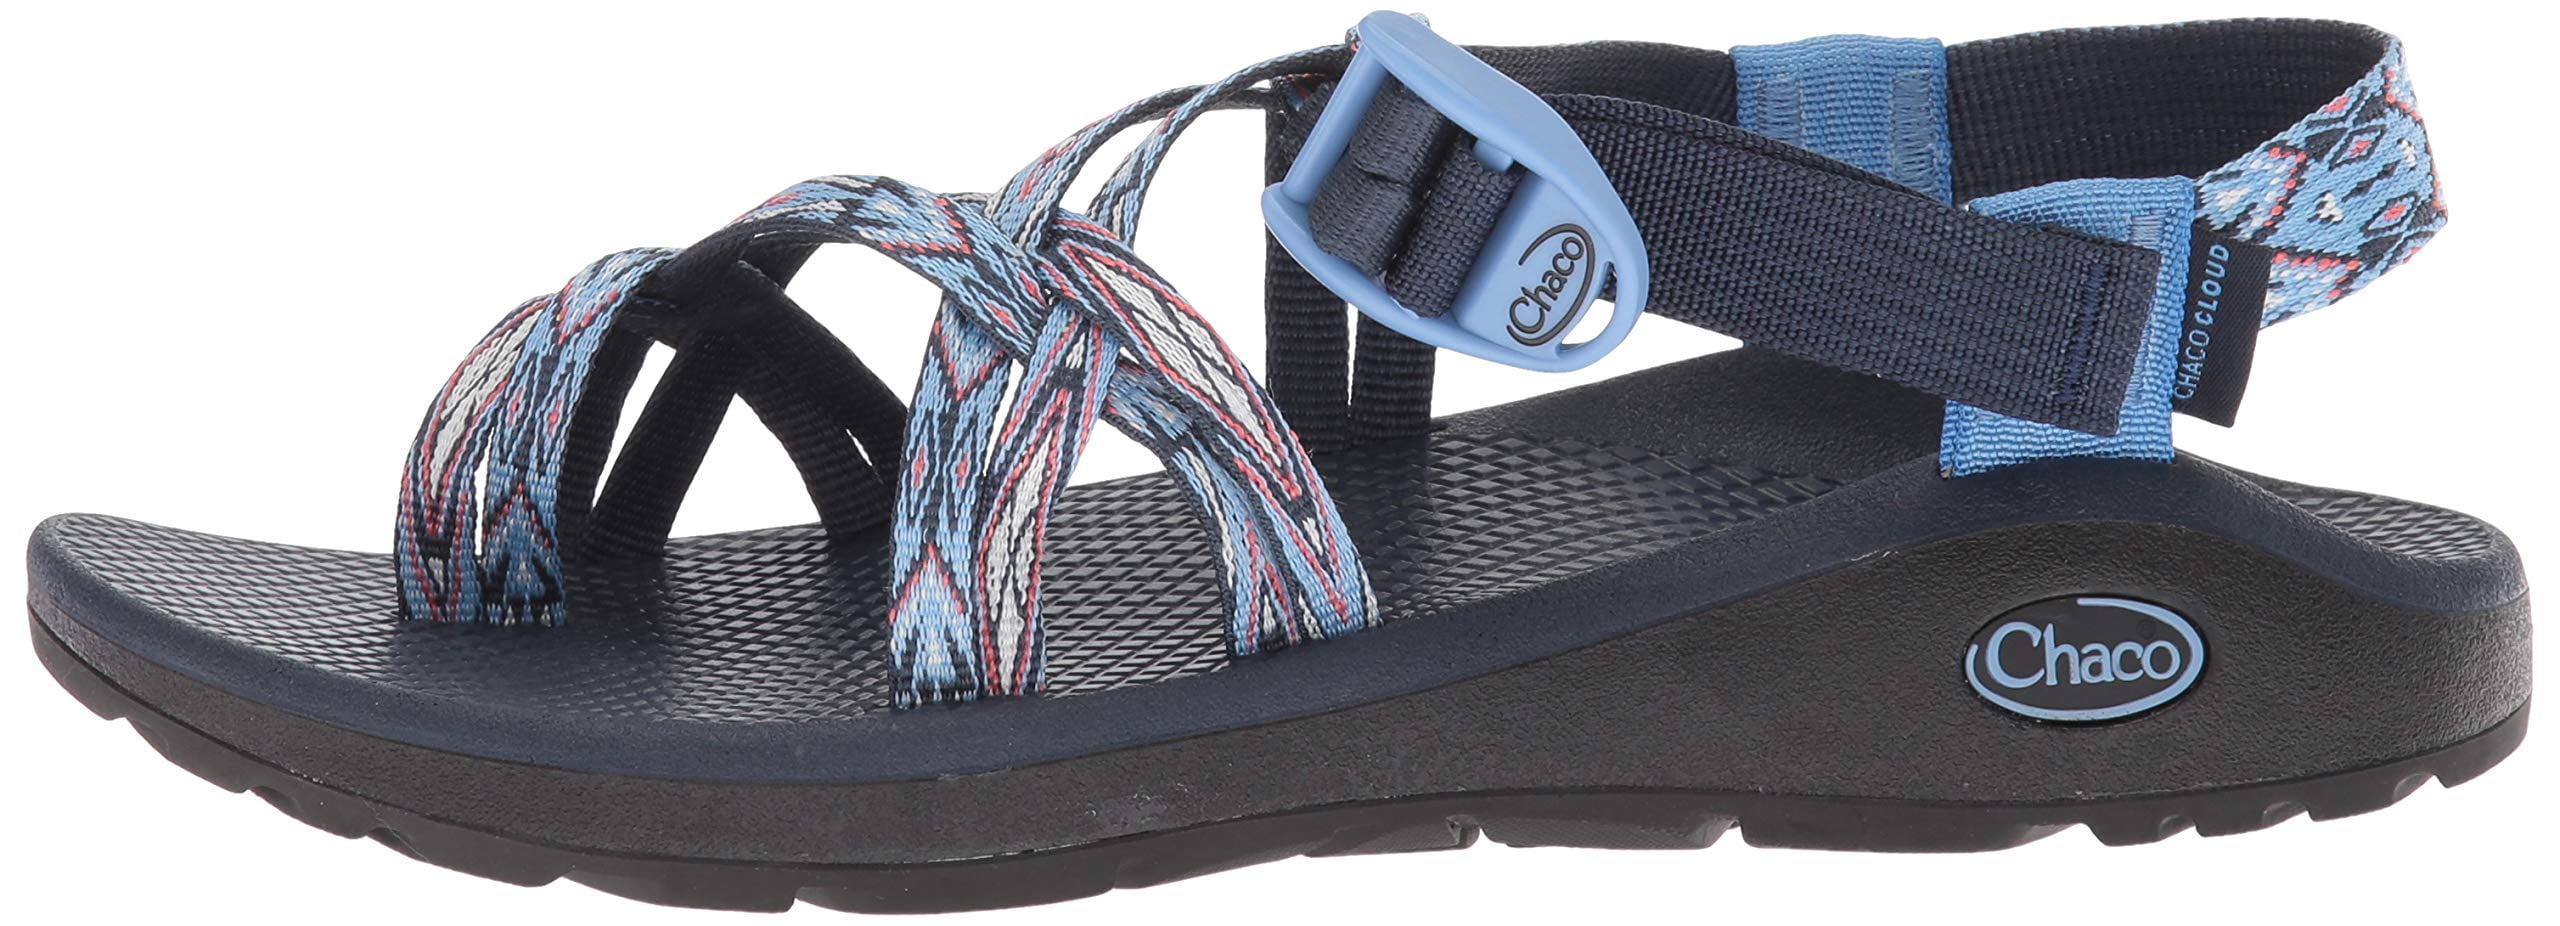 walmart sandals that look like chacos